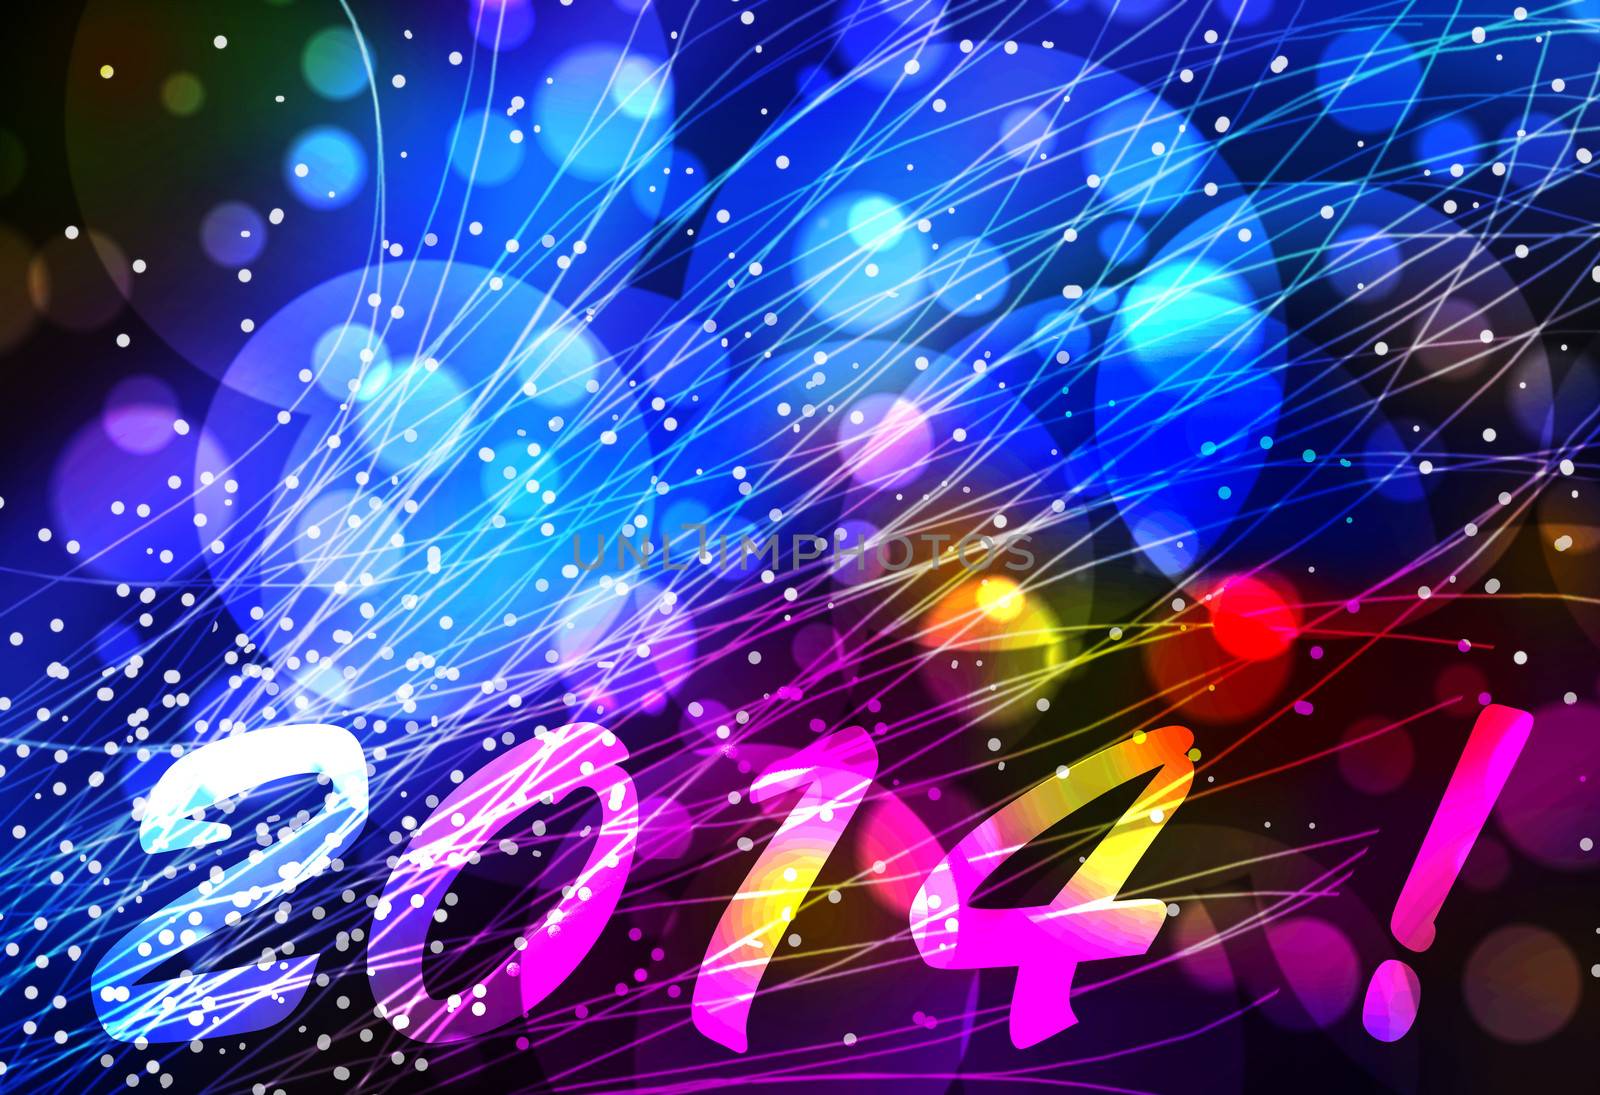 Happy new year 2014 card or background with light effects in blue, pink and yellow